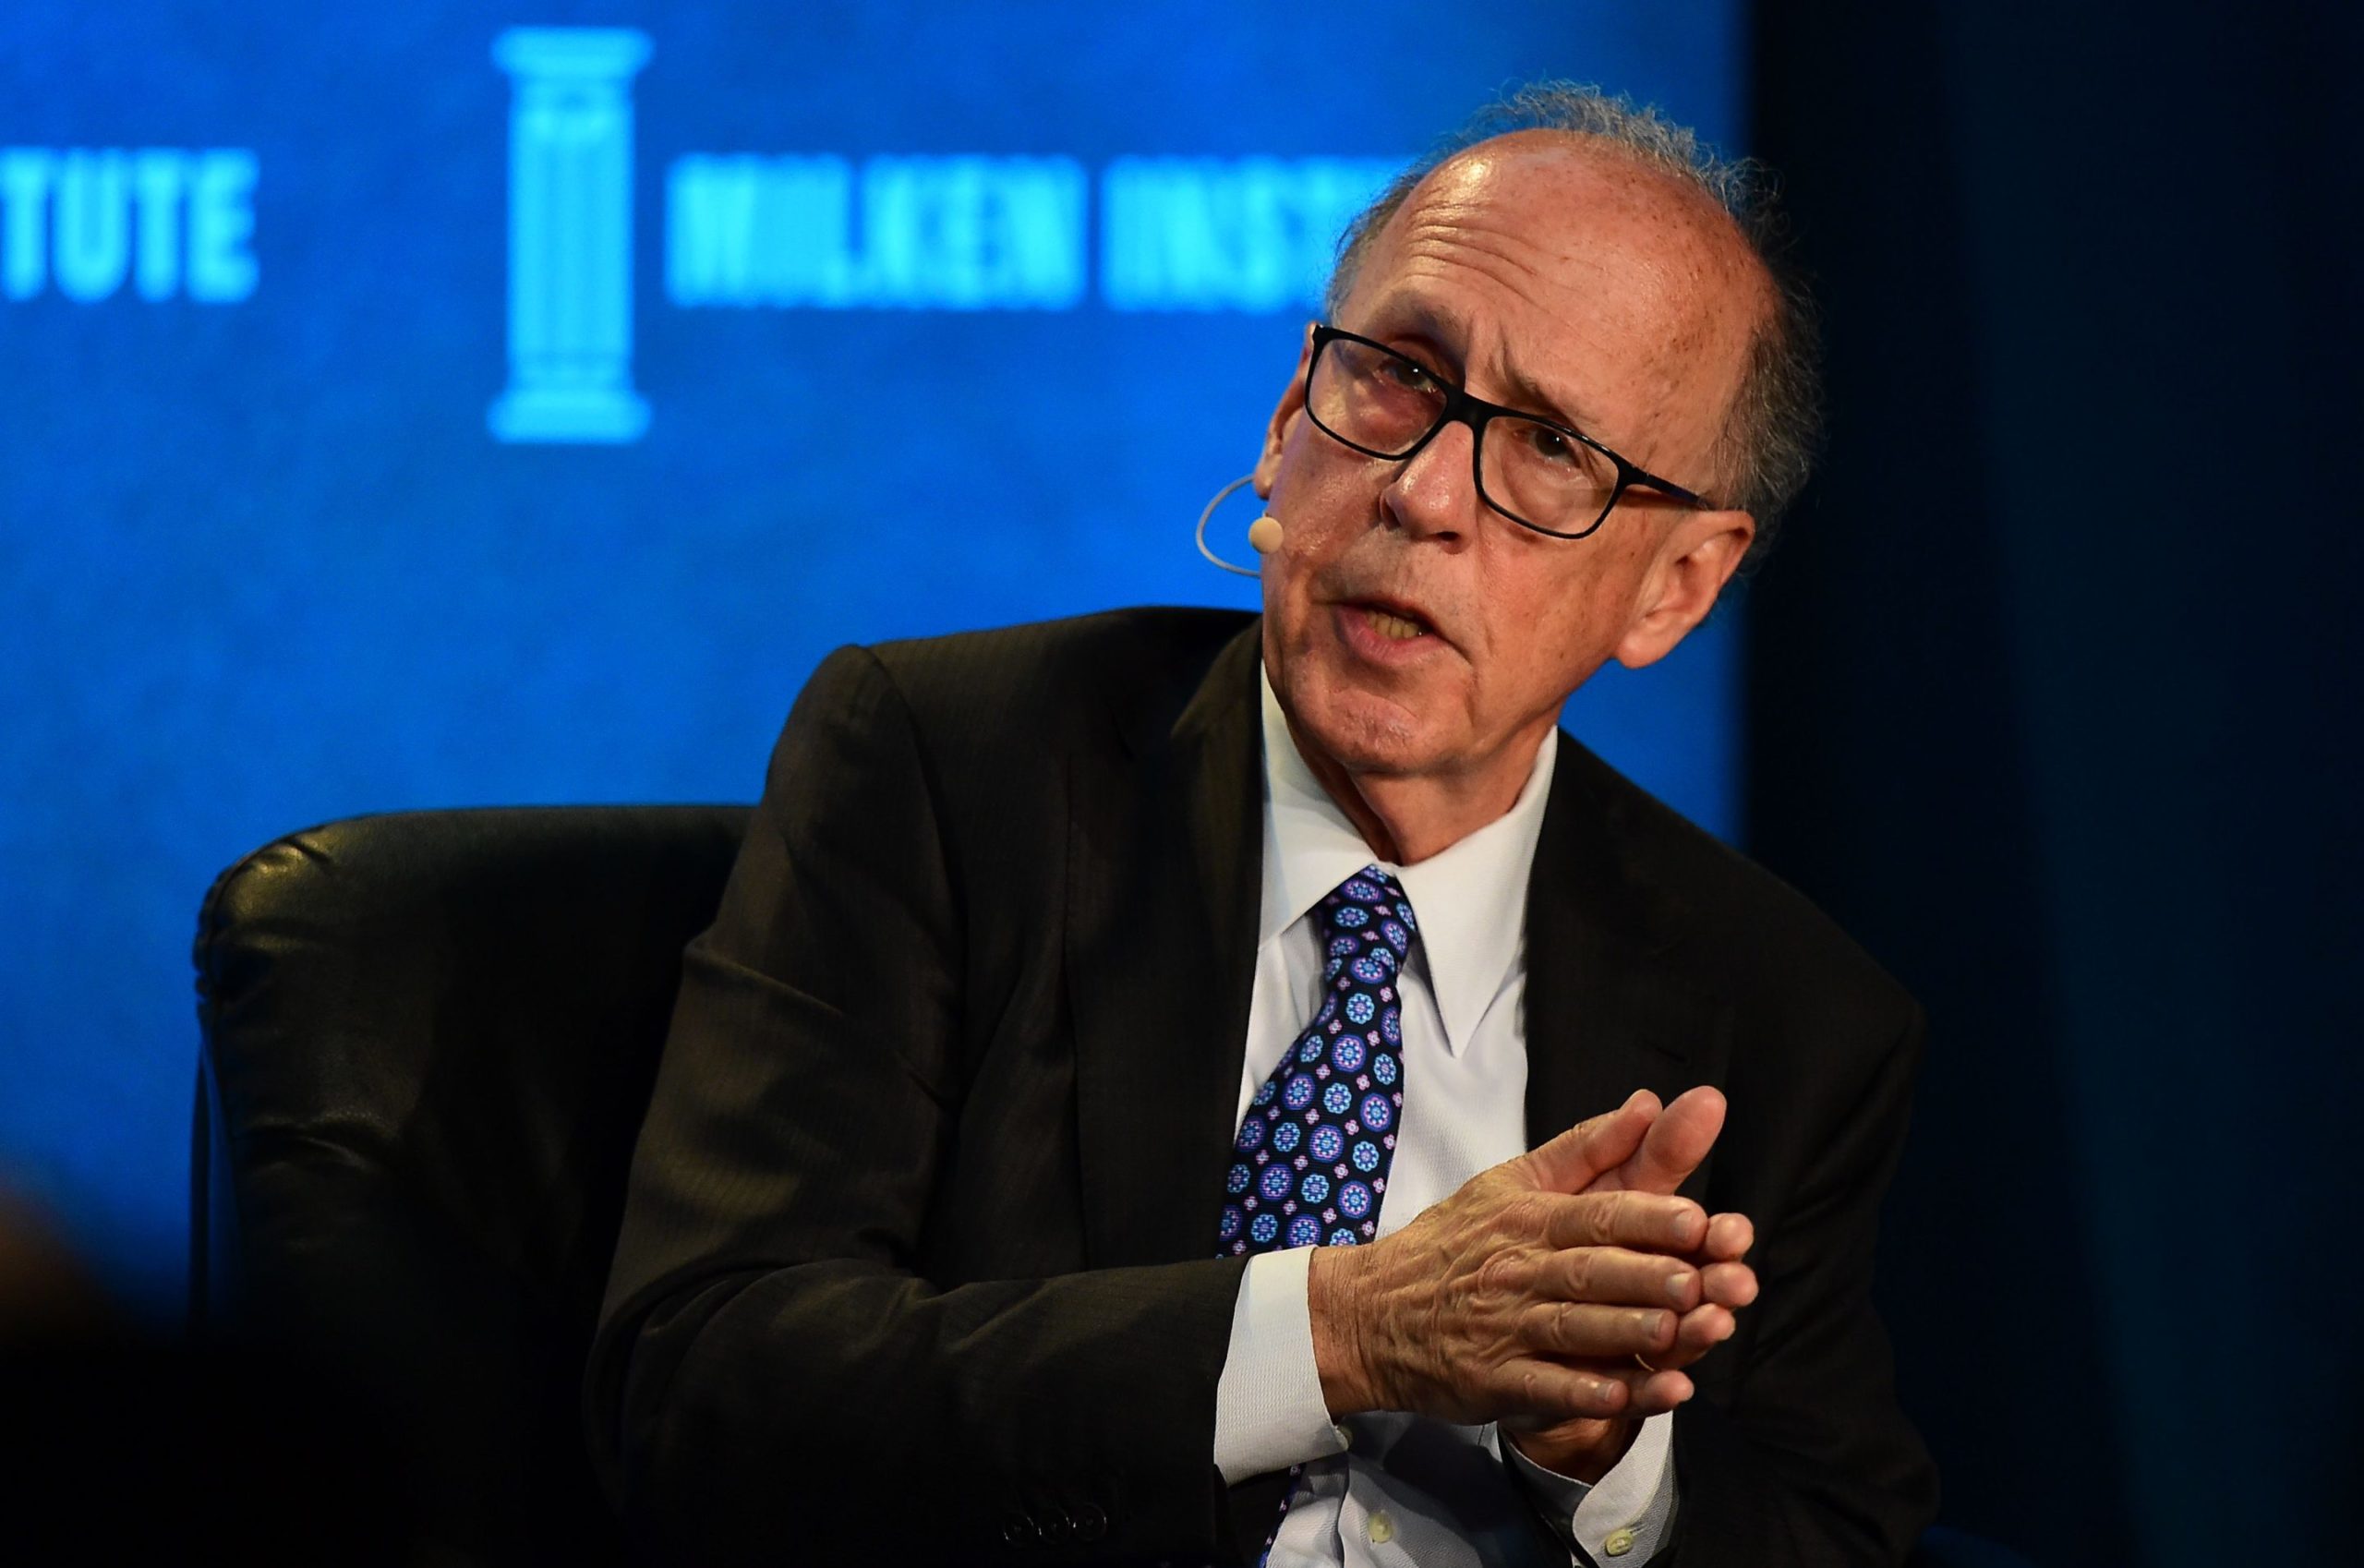 Economist Stephen Roach warns stagflation is coming to the US